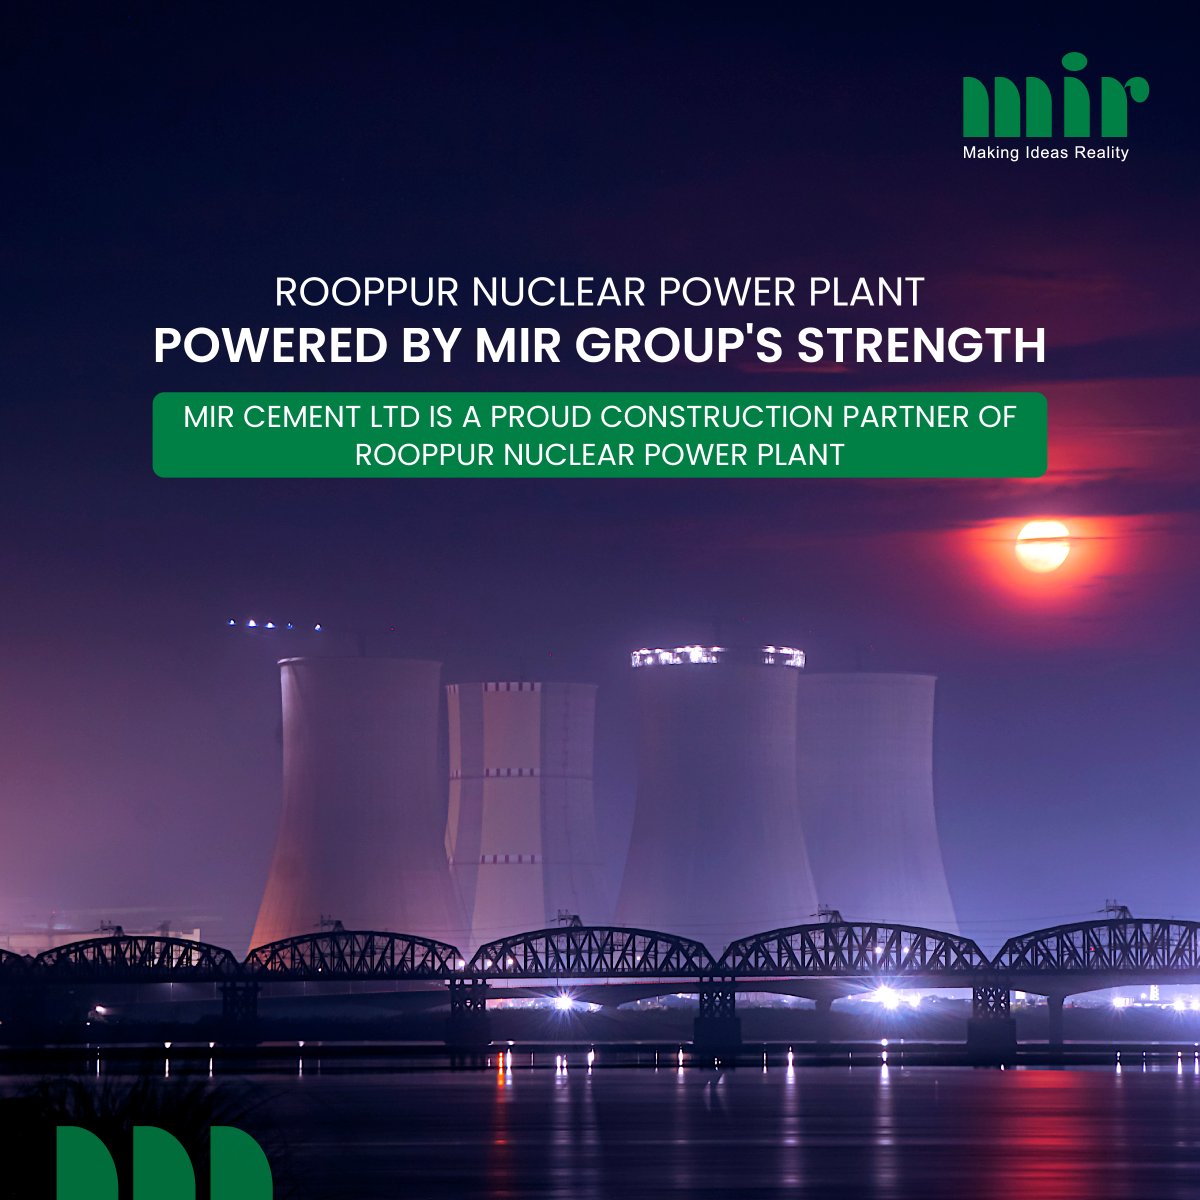 At Mir Group, quality is non-negotiable, and performance is exceptional. Proudly serving as the construction partner for the Rooppur Nuclear Power Plant. We deliver top-notch products that you can trust.

mirgroupbd.com

#mir #mirgroup #MakingIdeasReality